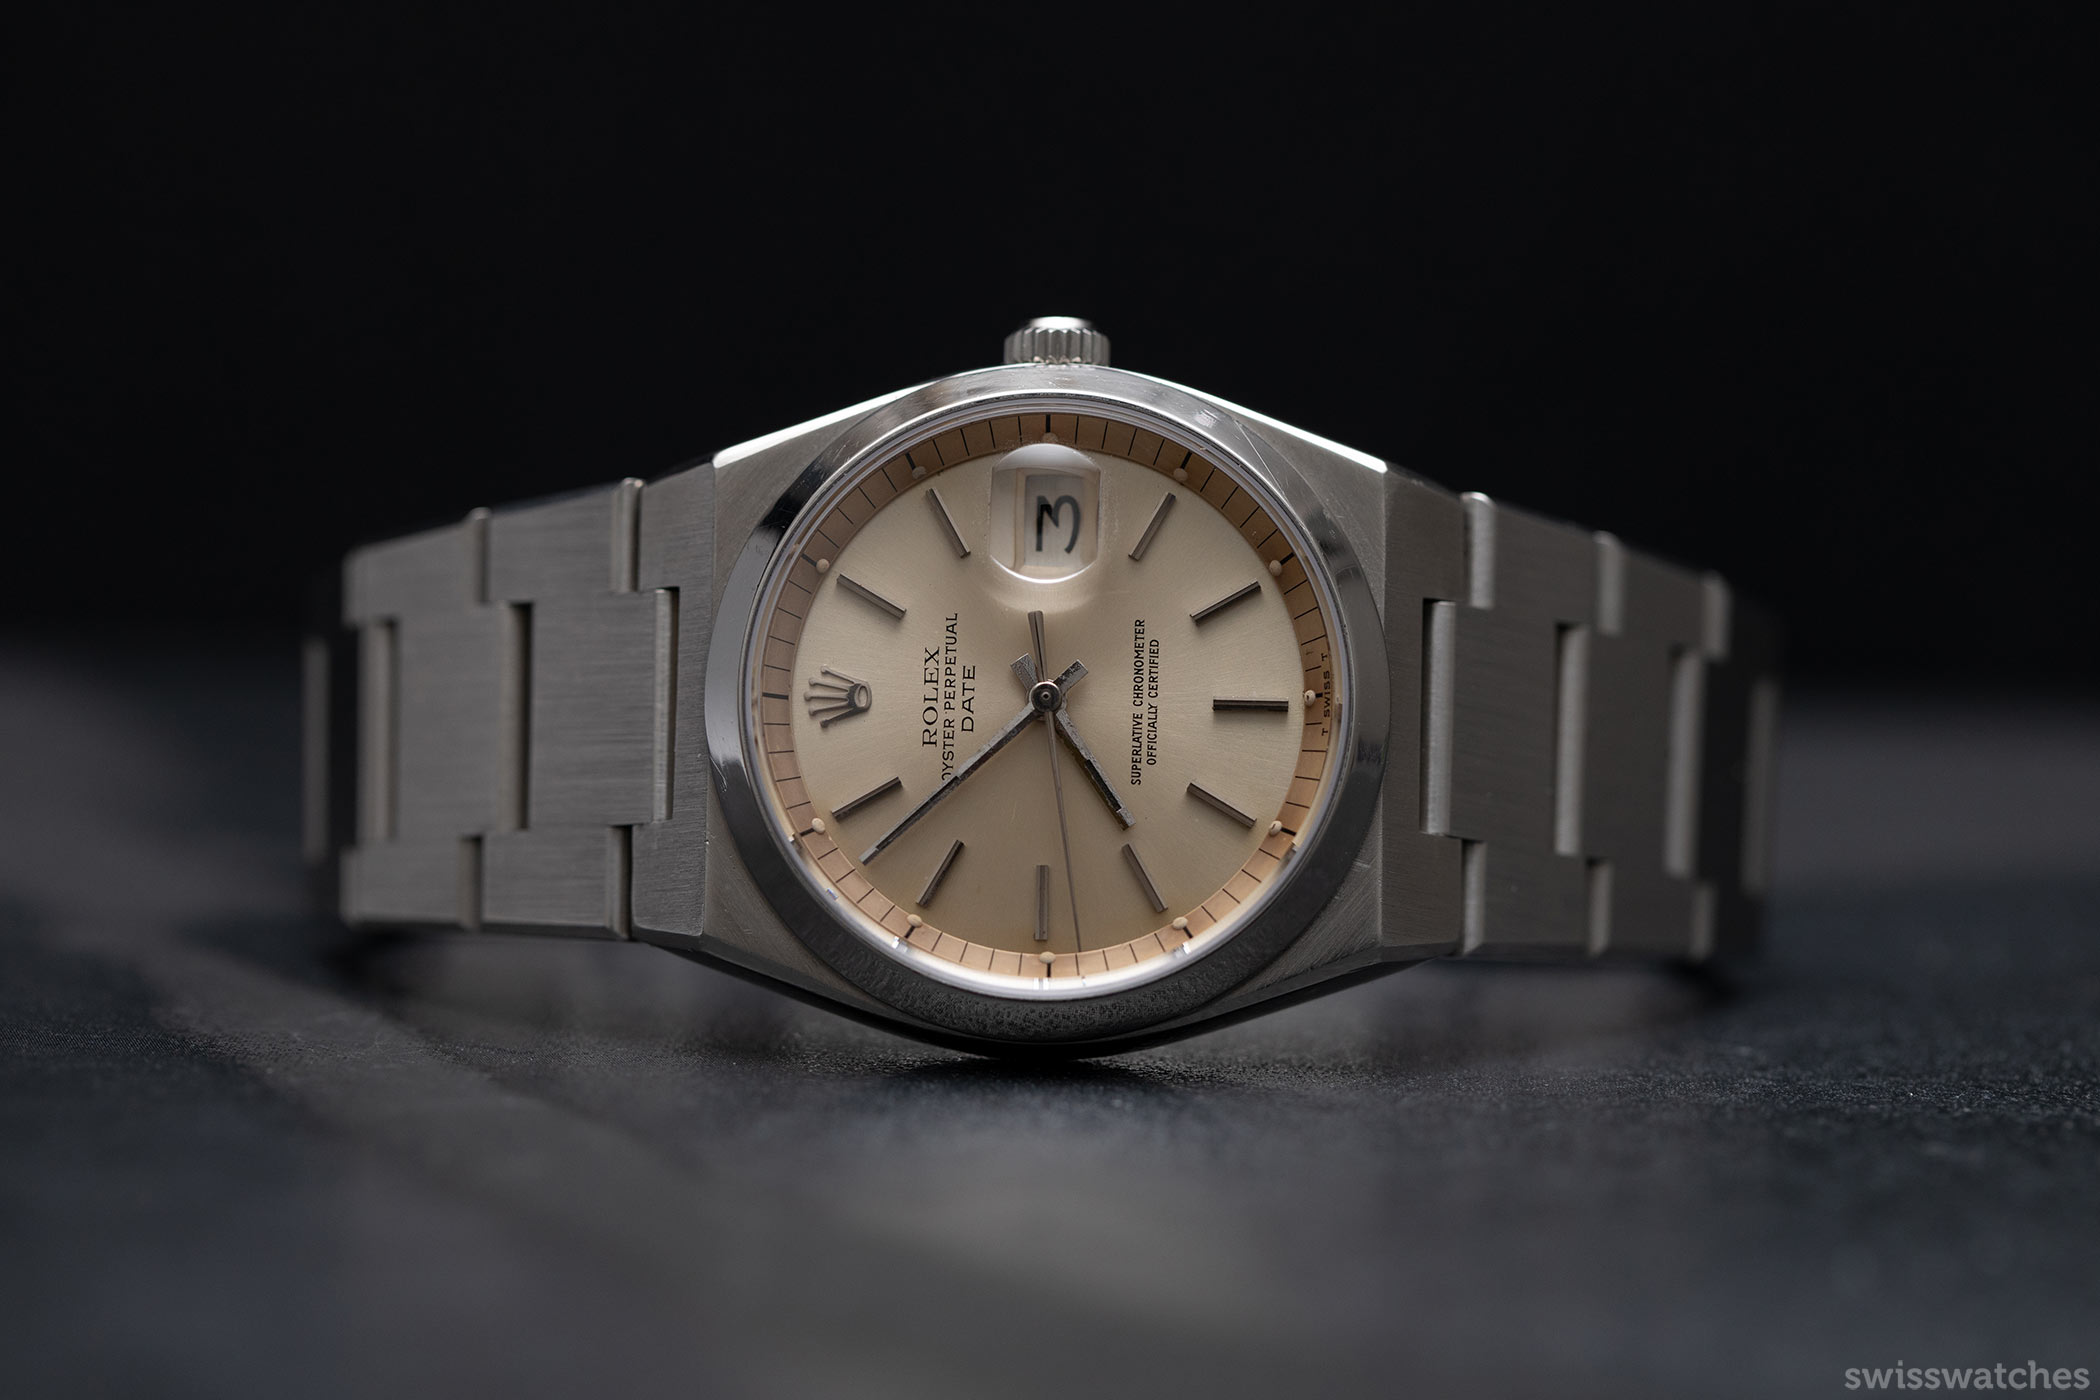 The Curious Tale Of The ROLEX 1530: An Automatic Movement In A Quartz | Swisswatches Magazine